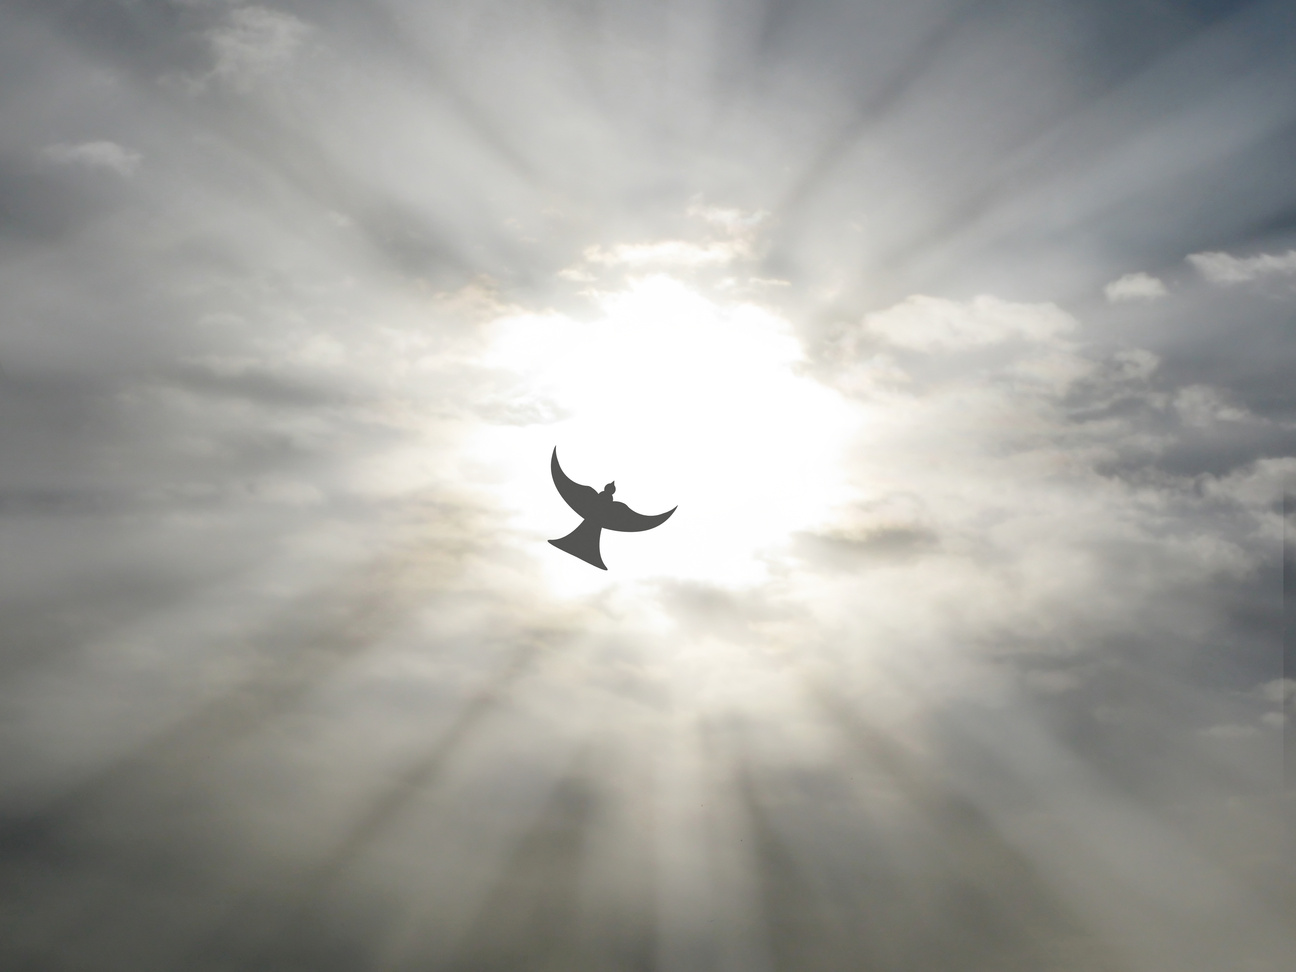 easter holy spirit peace dove flying sky clouds sun rays